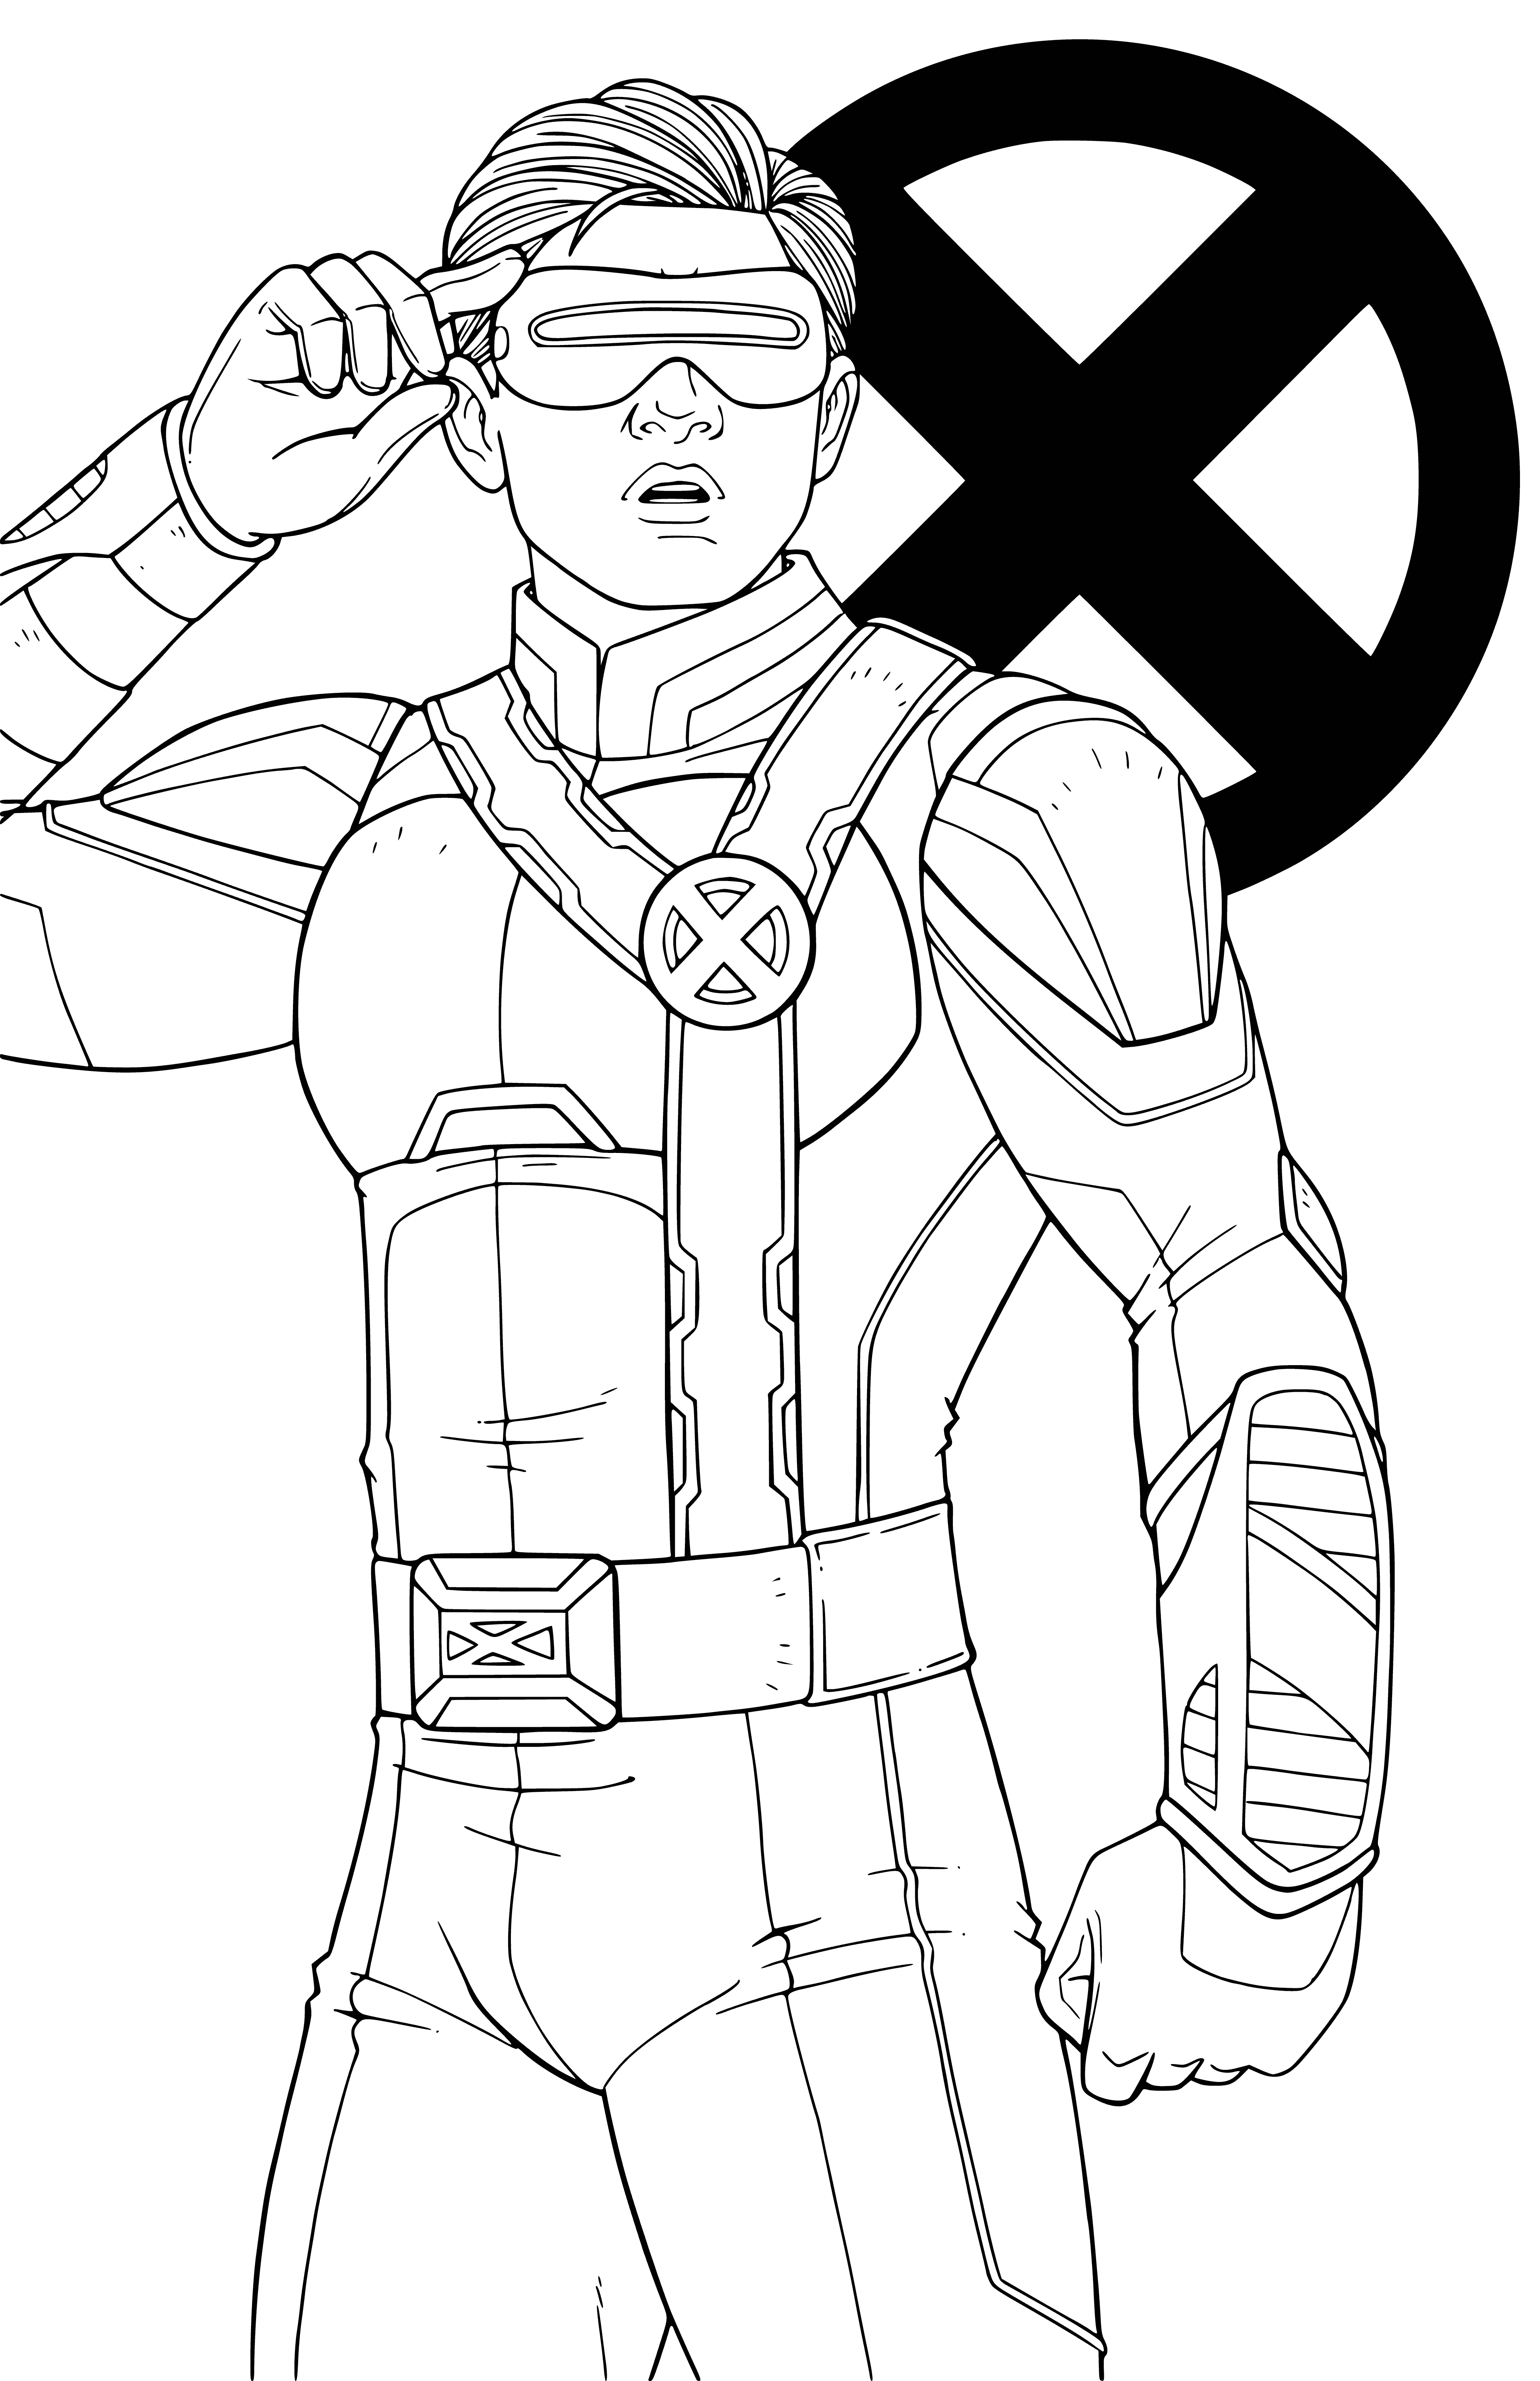 coloring page: Superhero in blue and yellow costume flying, red cape billowing, big "S" on chest, black eye looking to side.